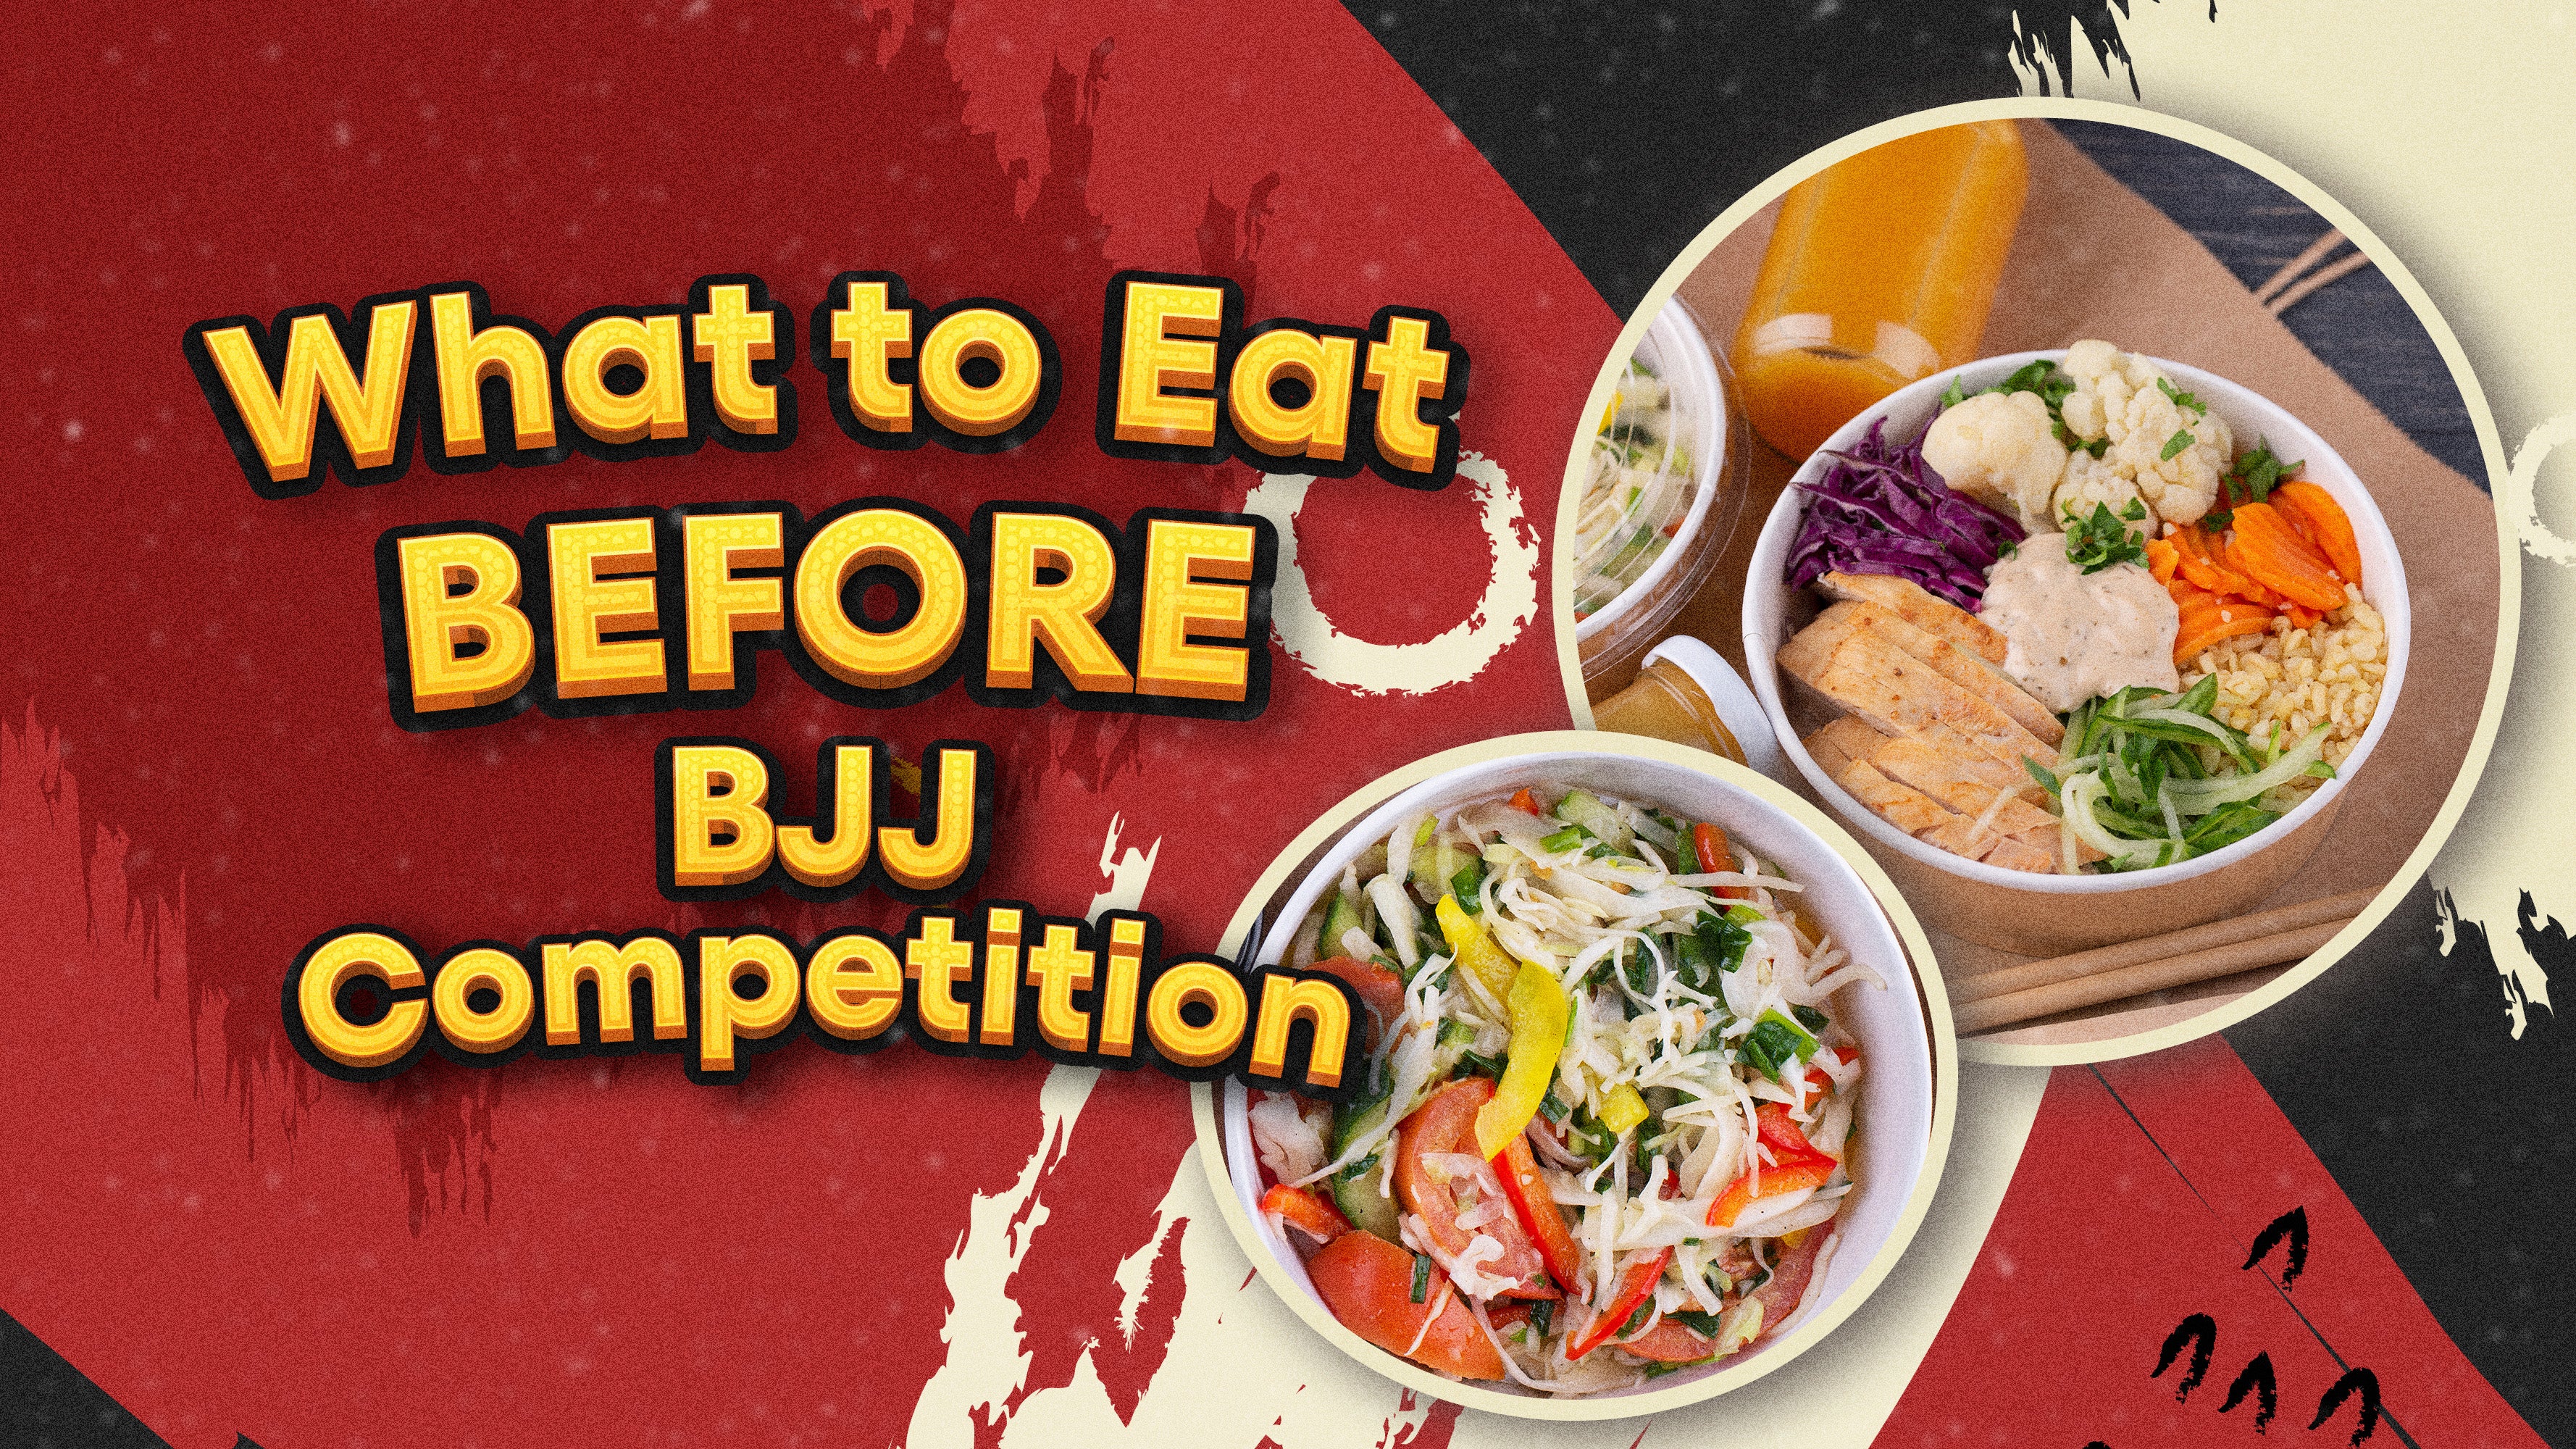 What to Eat before BJJ competition